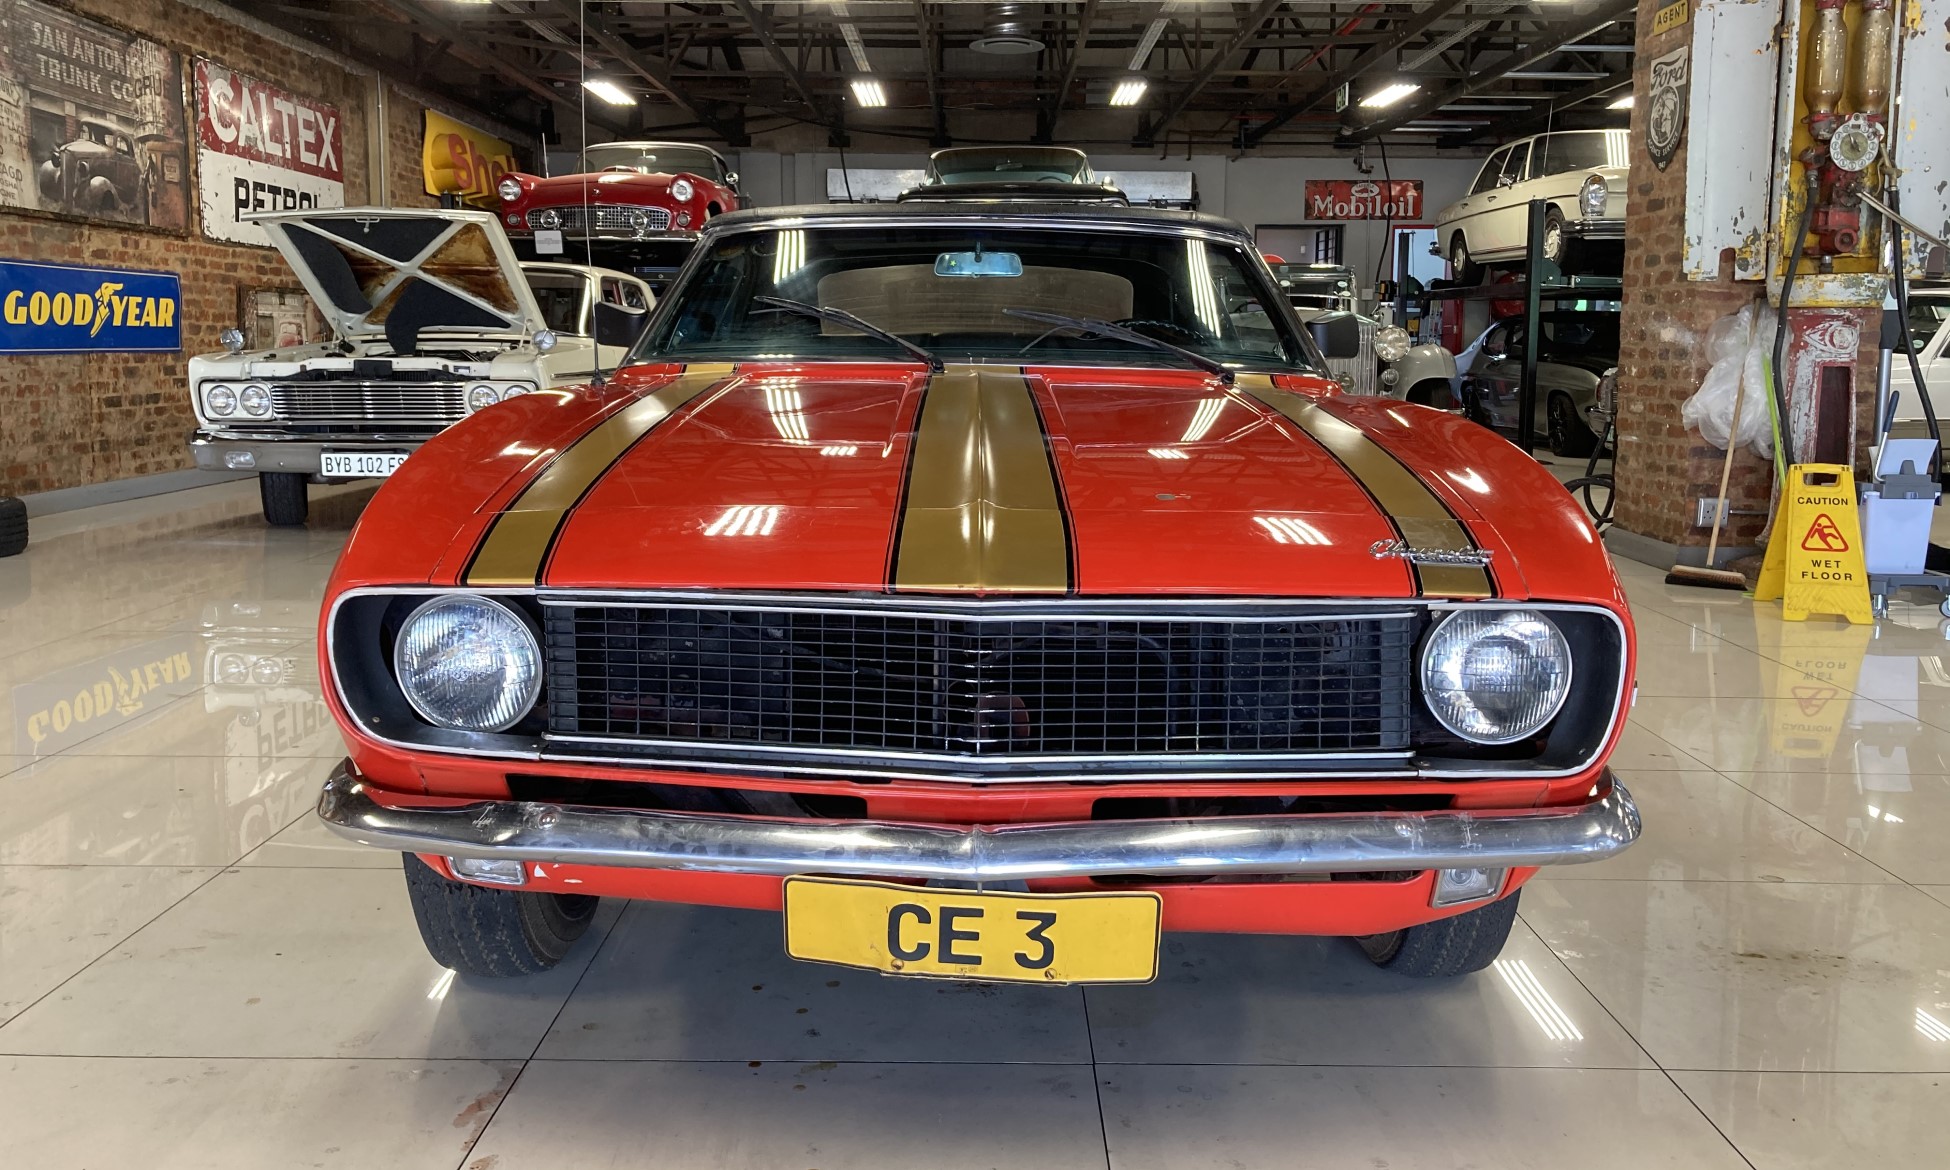 South Africans own part of Coetzer coveted vintage car collection